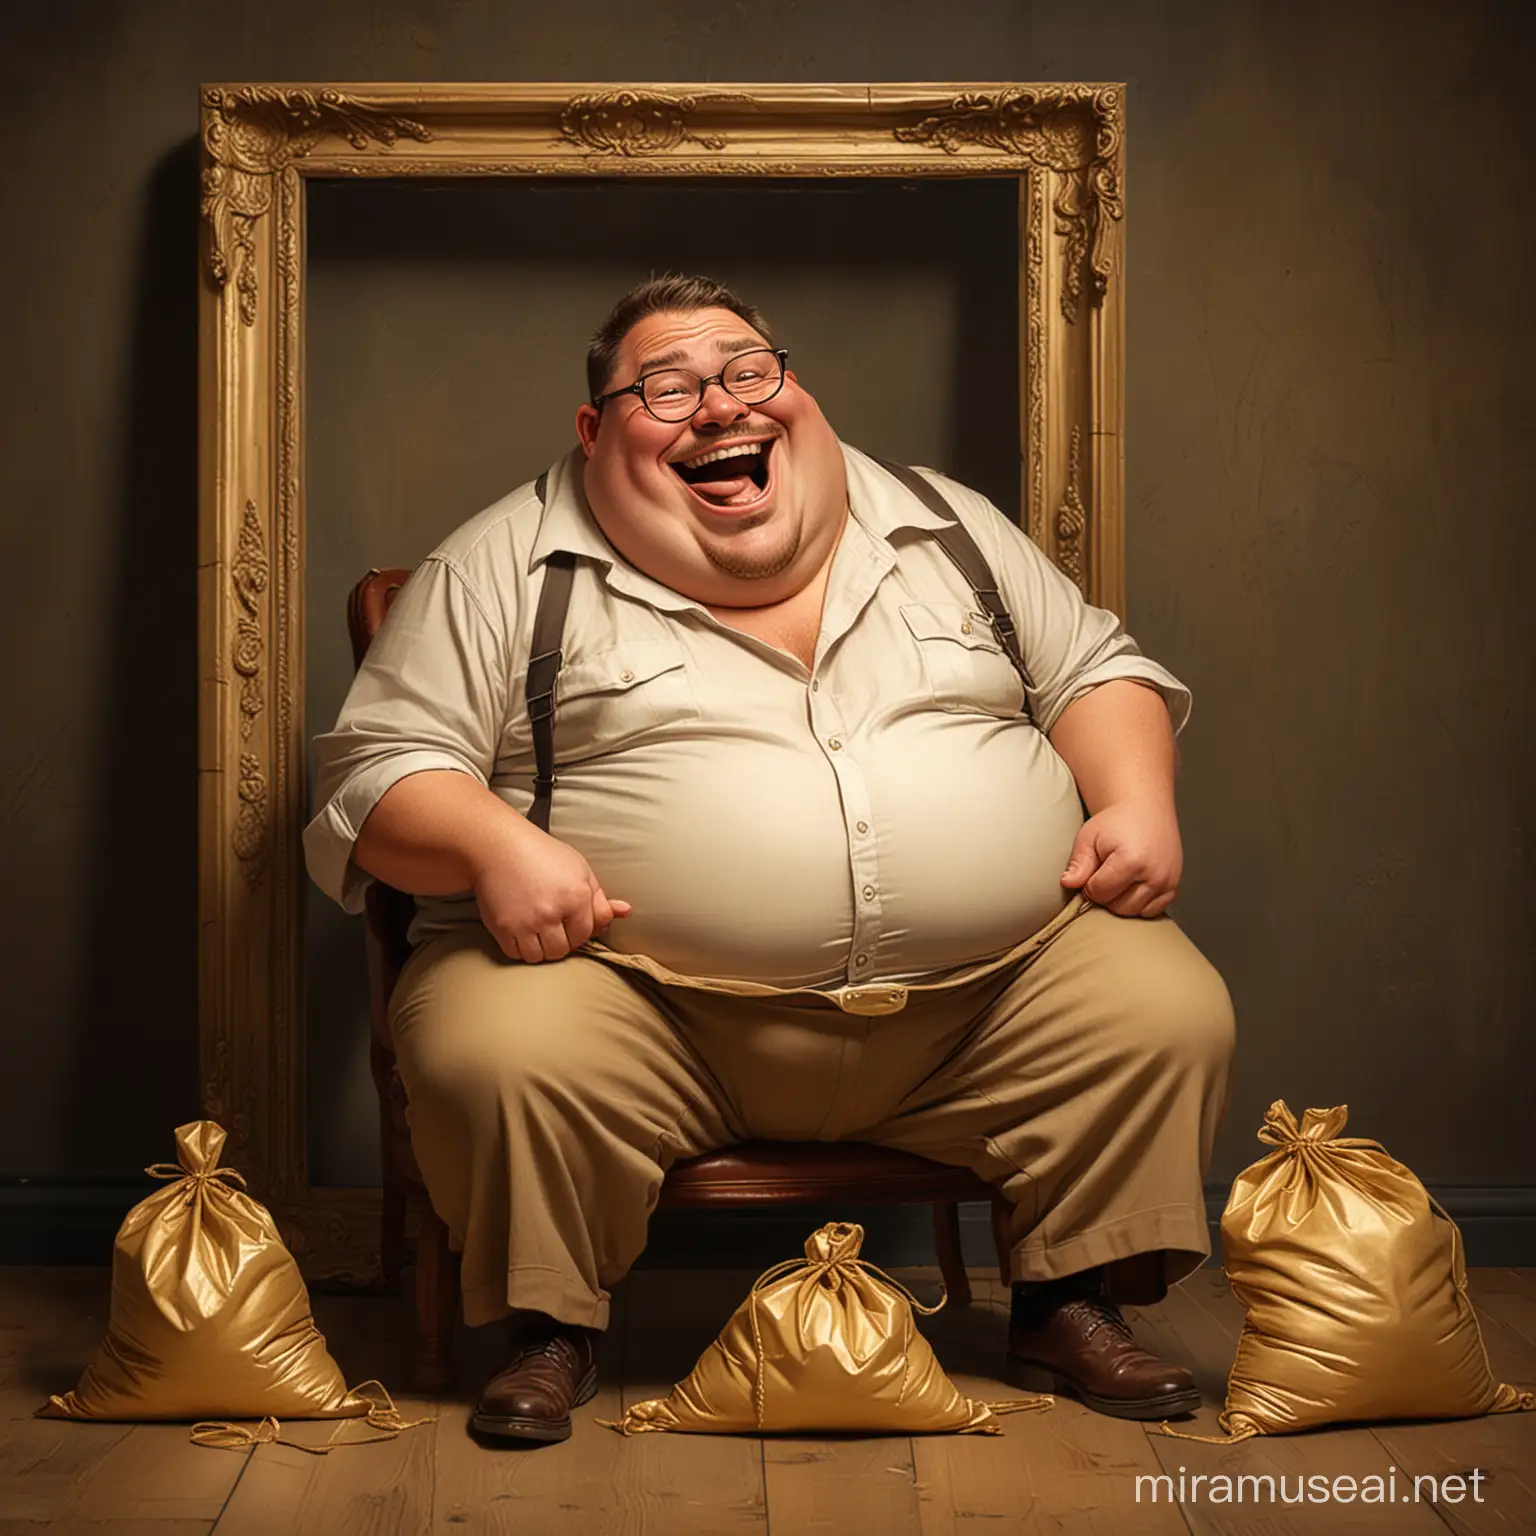 A caricature of a fat man with big stomach, putting on cold chains, and over sized frame eye glasses, laughing, on suite , seating on a chair with gold sack on  the floor, on a dark dramatic background 